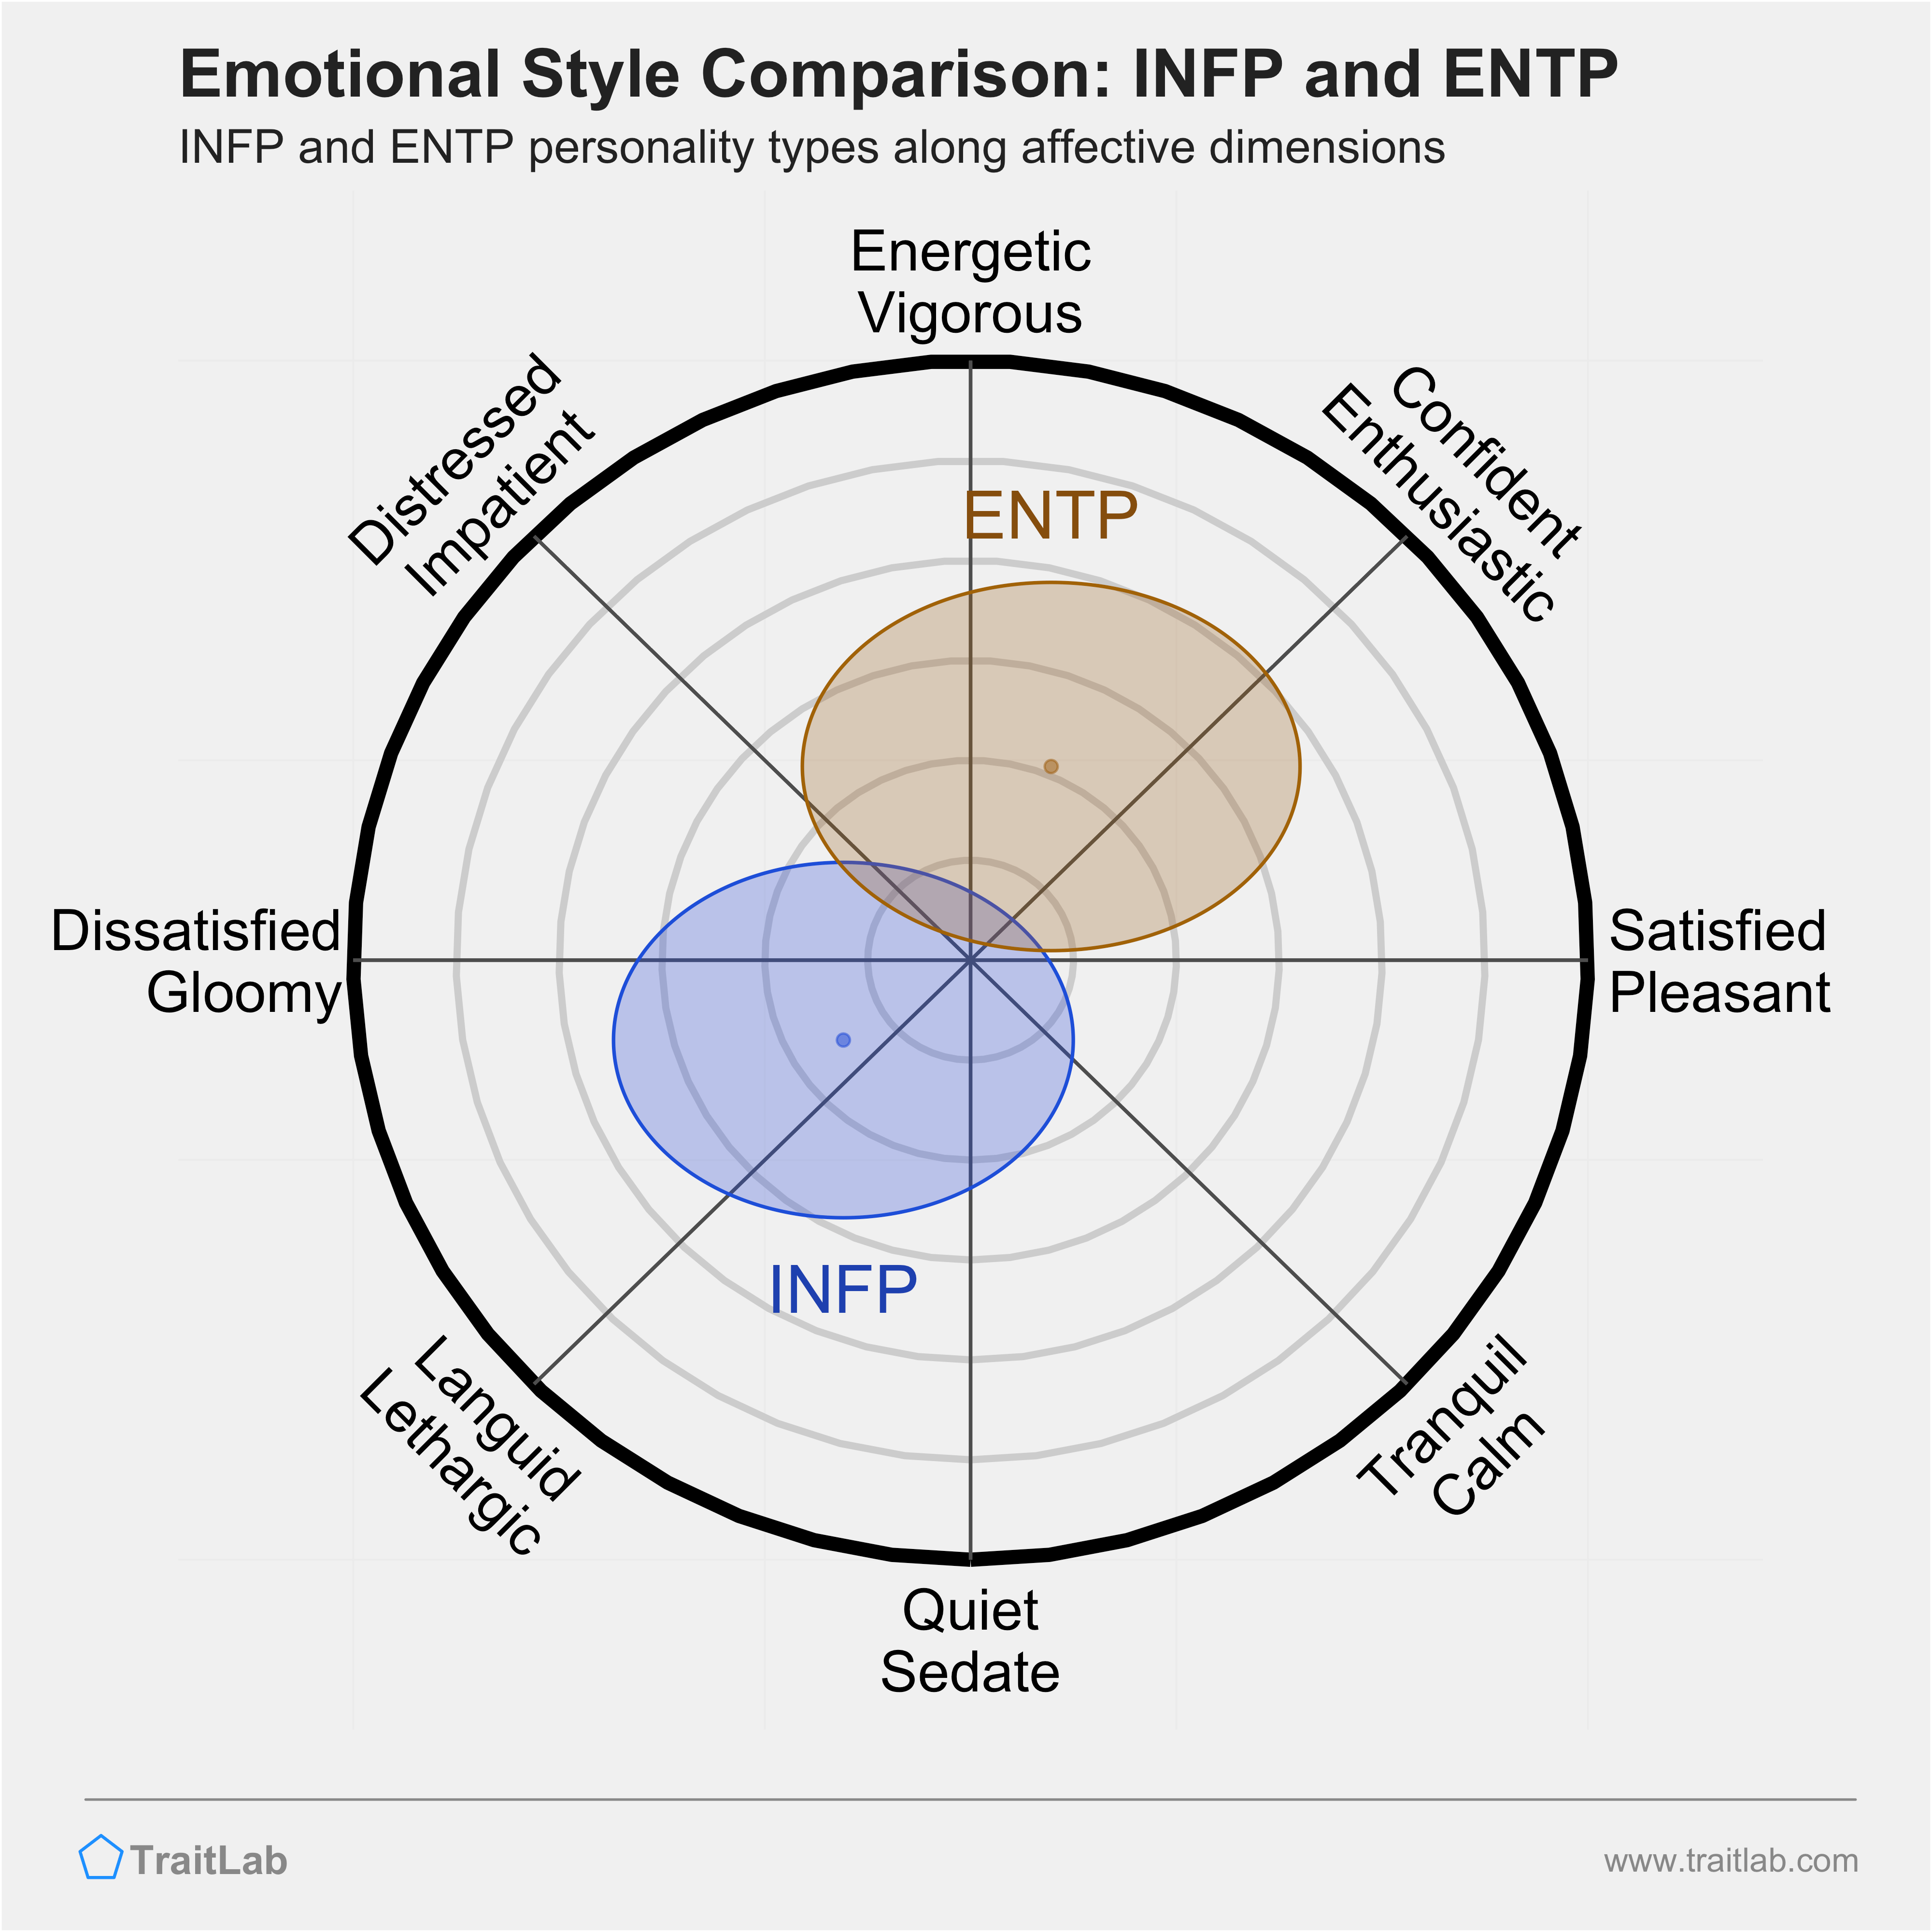 Entp and infp